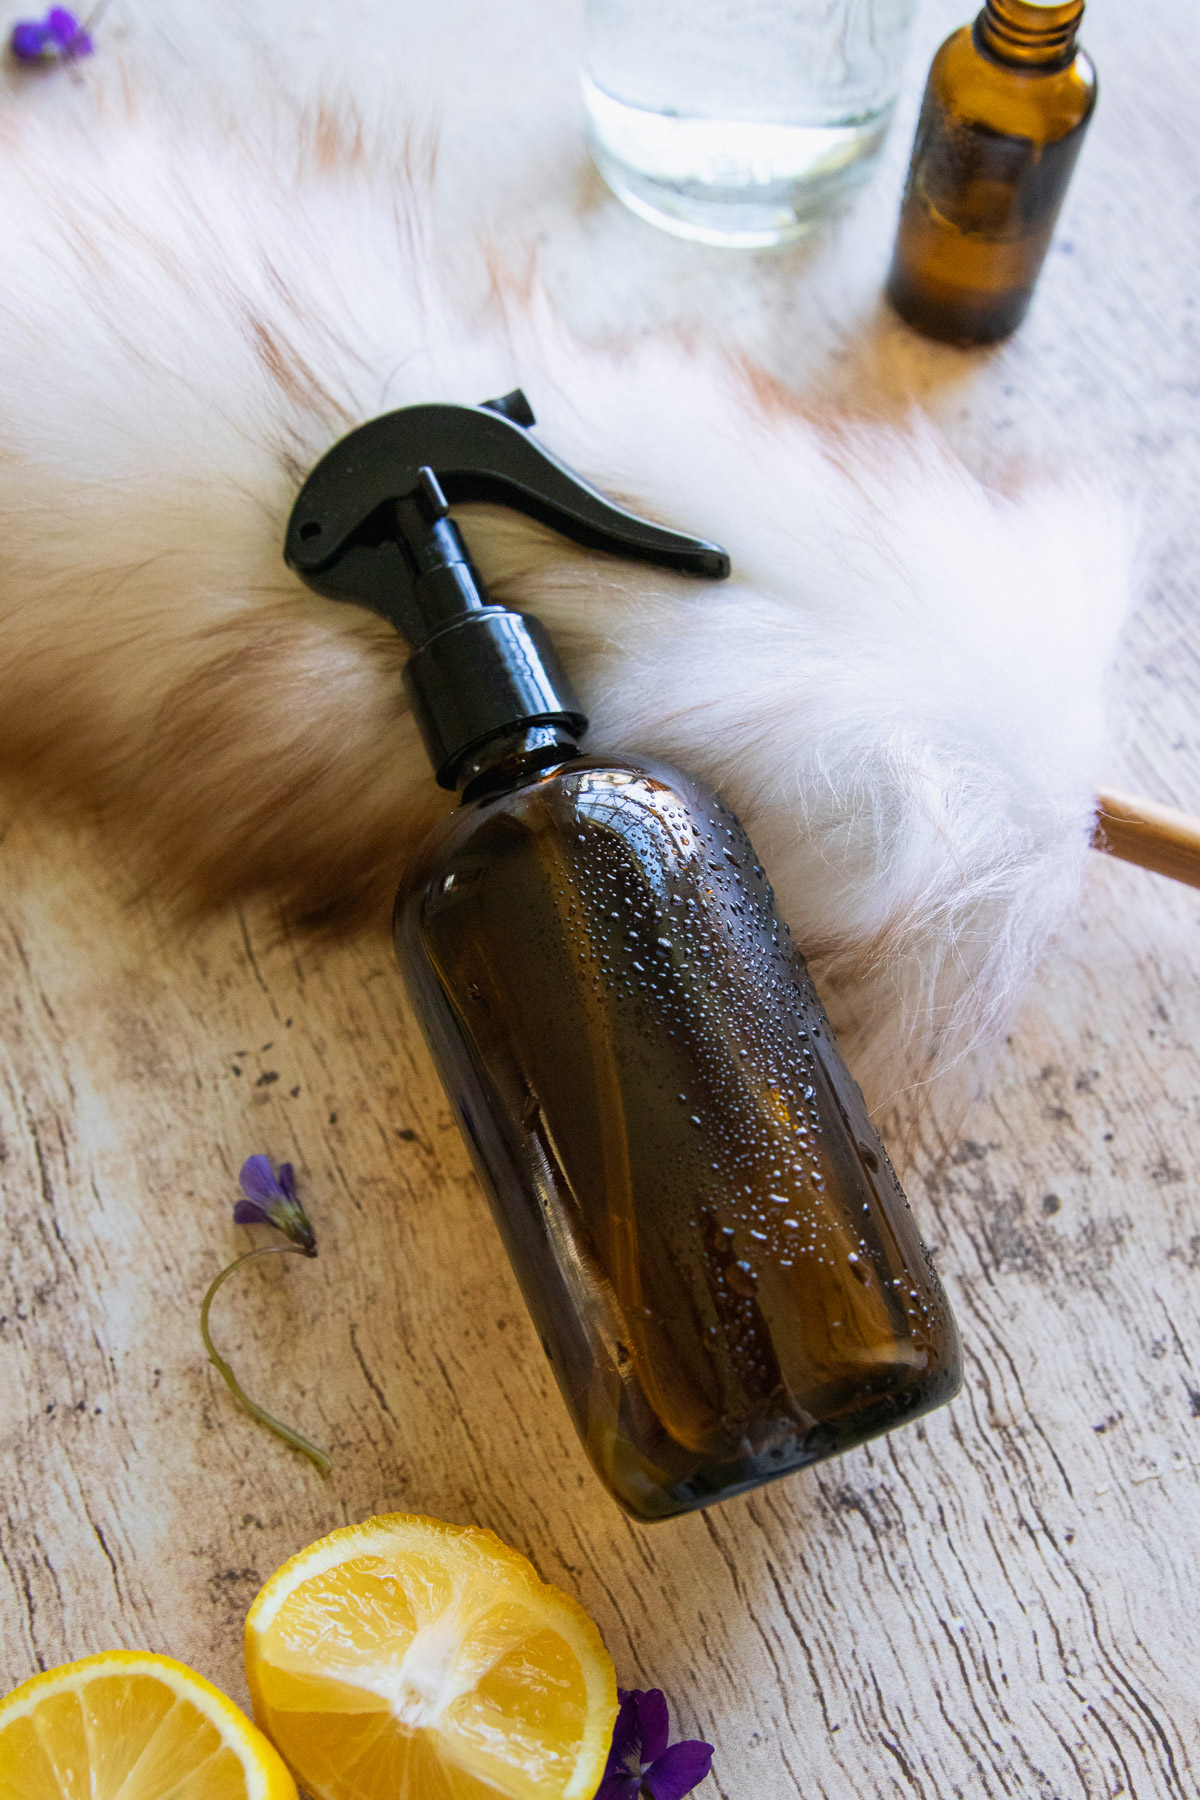 Made with just 5 ingredients, this homemade dusting spray tackles dust, nourishes wood, and leaves surfaces looking shiny and new.